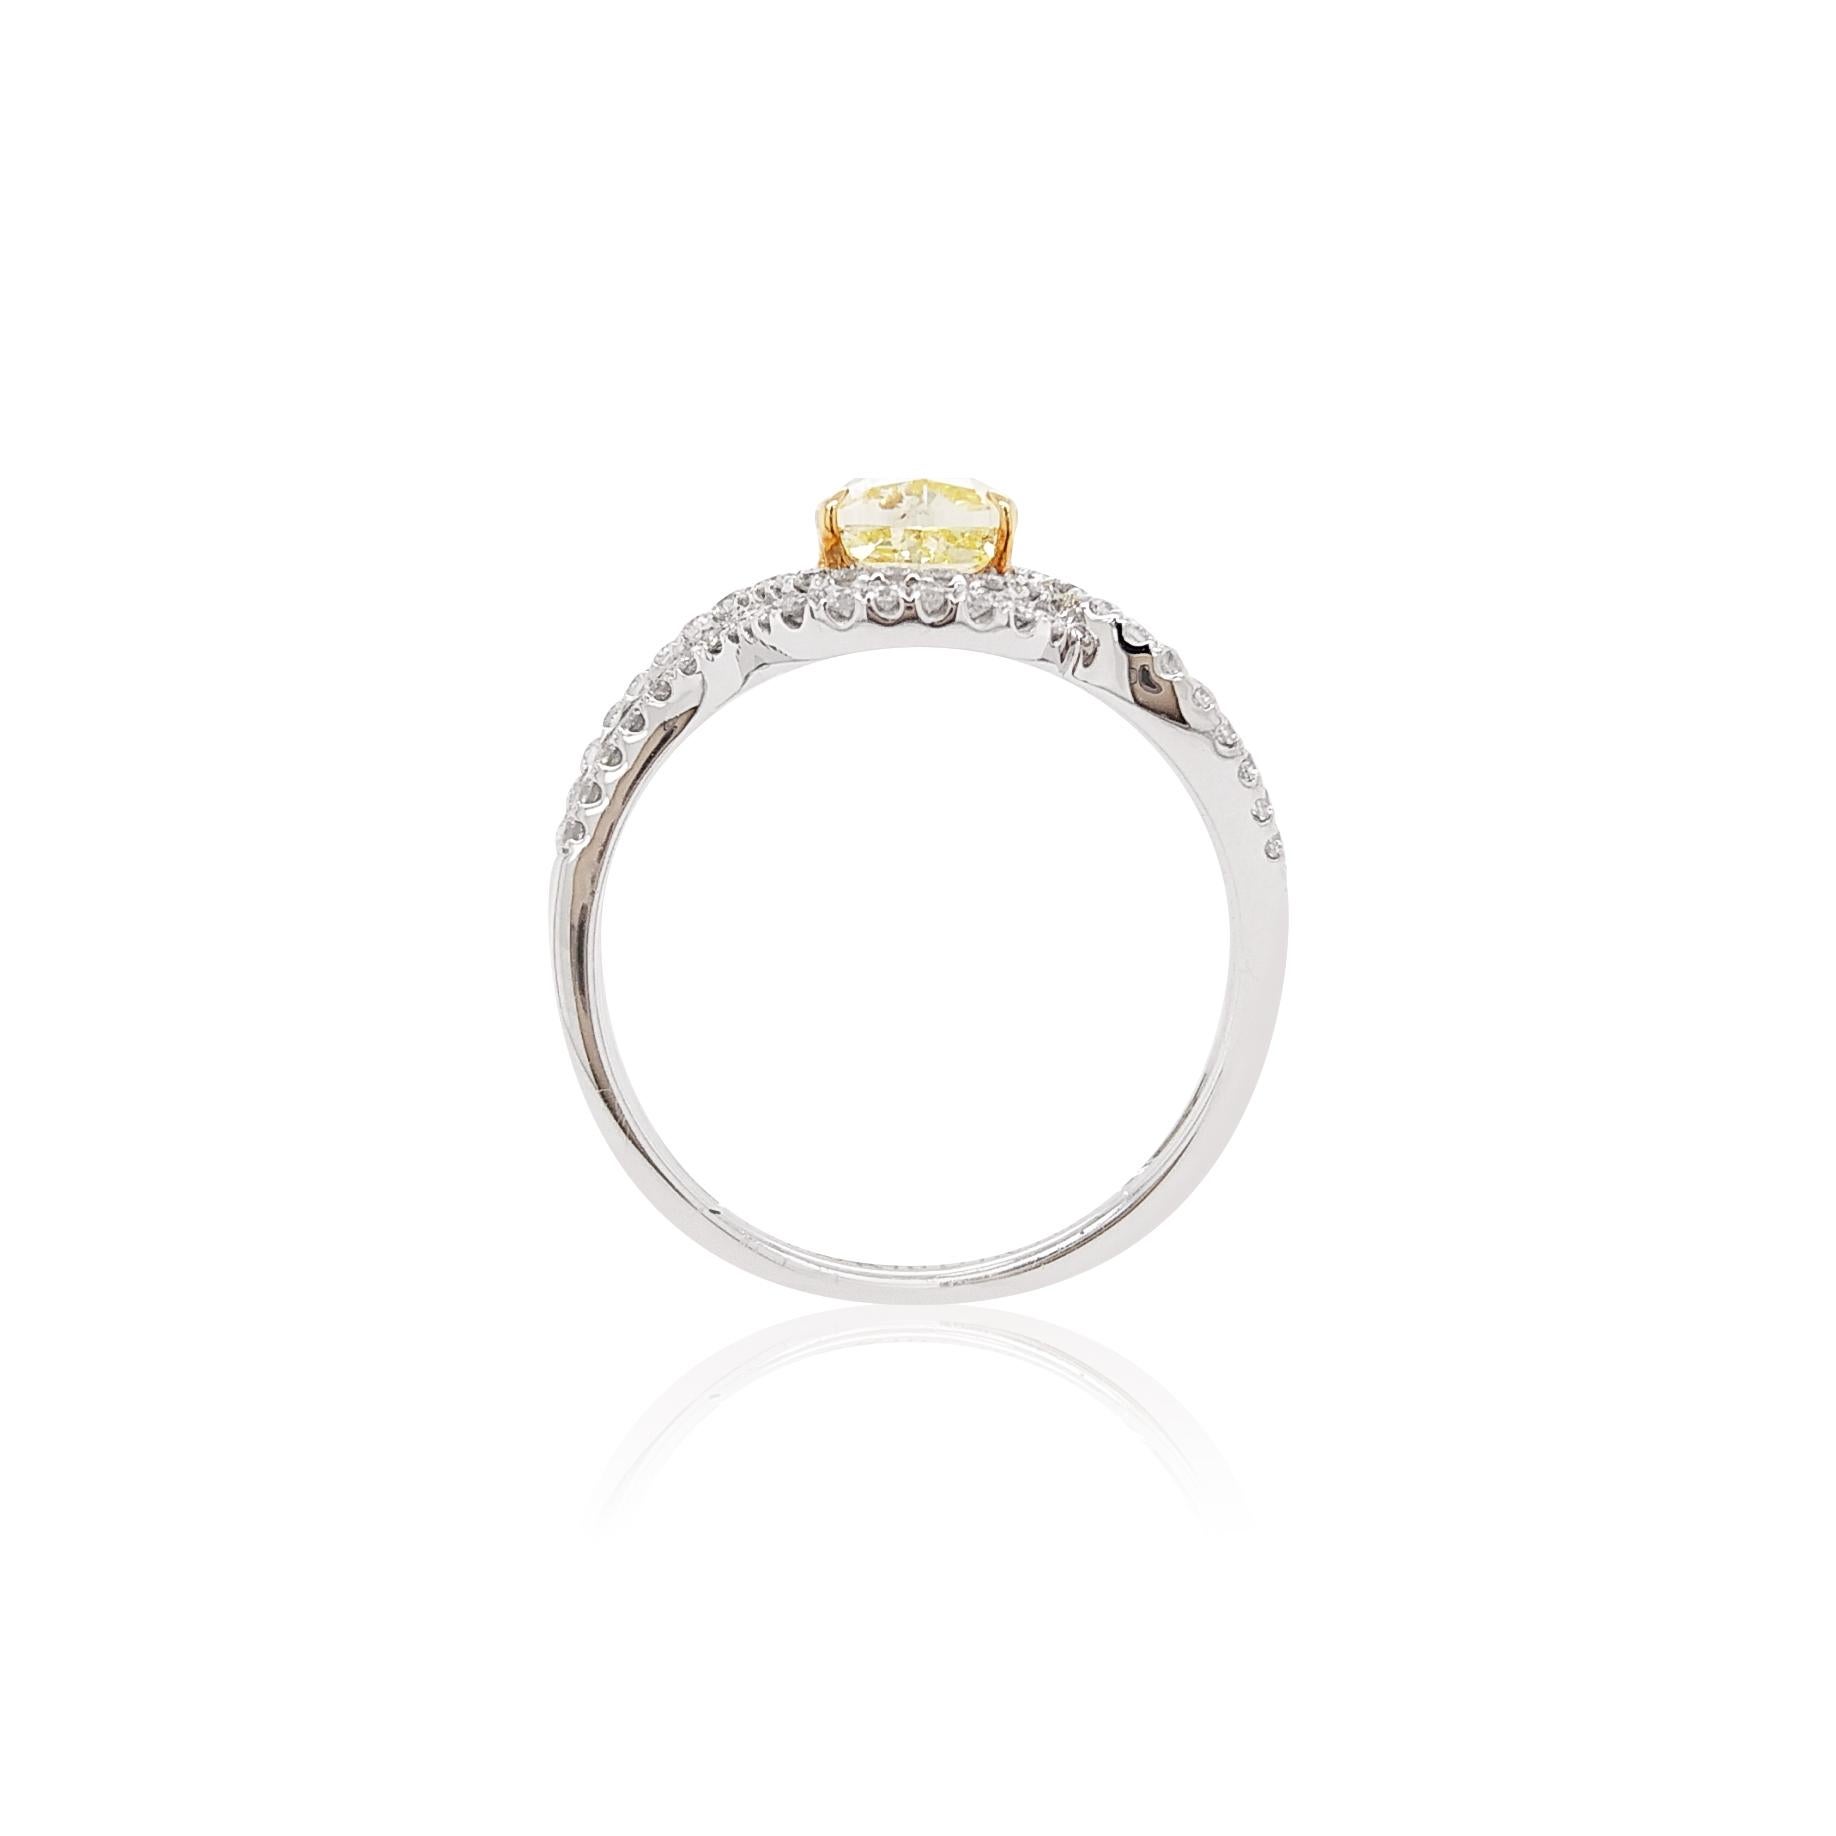 This scintillating ring features a brilliant Fancy Yellow Diamond set amongst contemporary White Diamond swirls. The rare natural golden yellow diamond featured at the centre of this ring is the perfect way to add a subtle pop of color to your